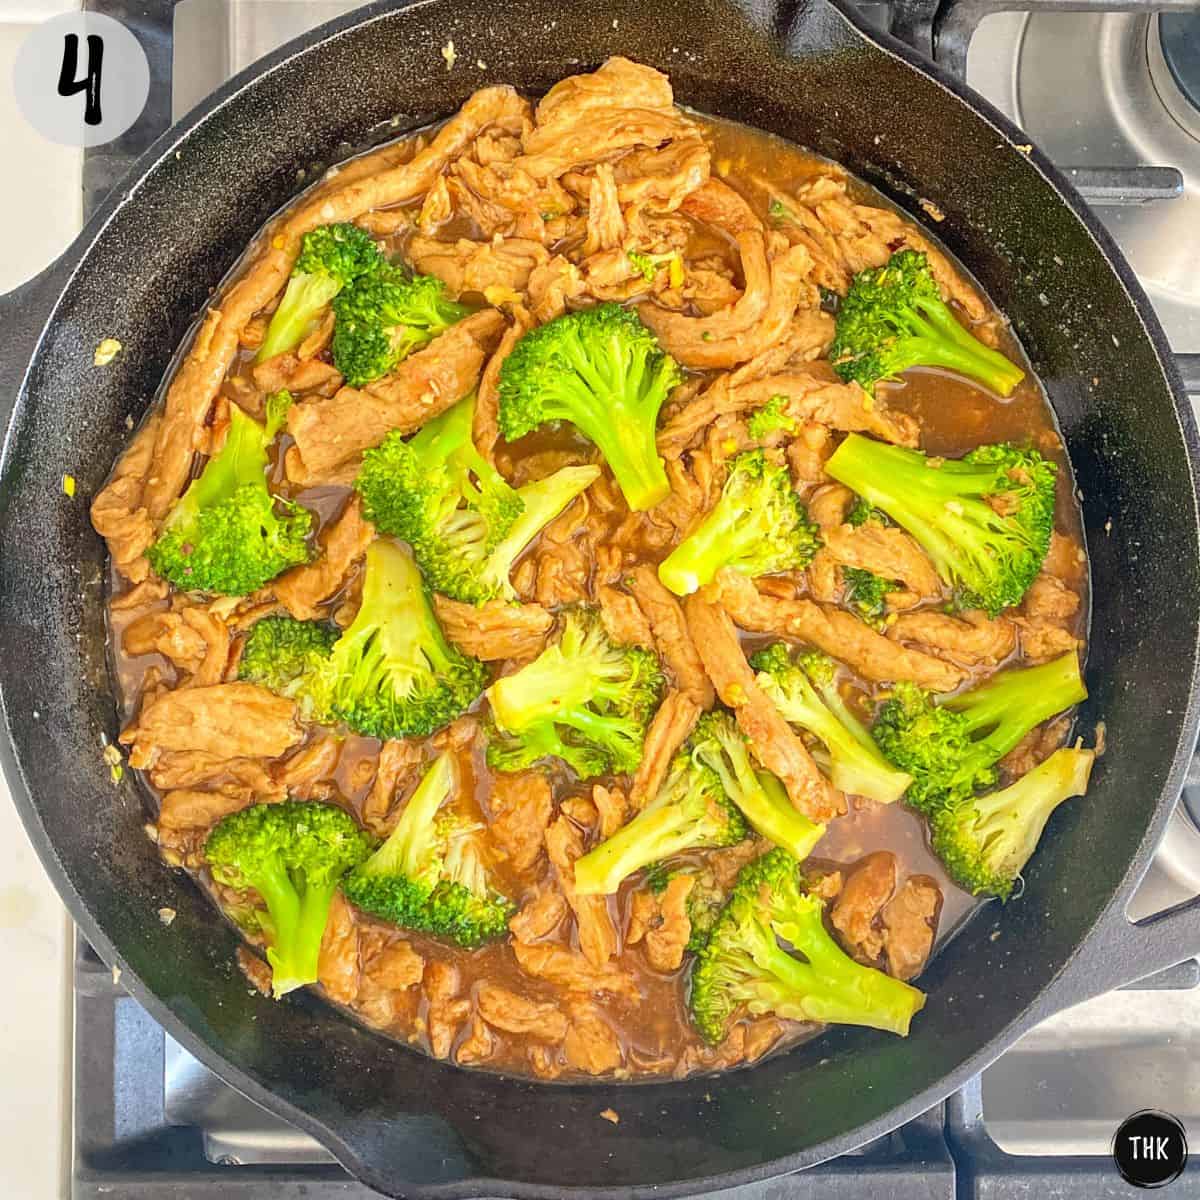 Soy curls, broccoli and brown sauce inside cast iron pan.